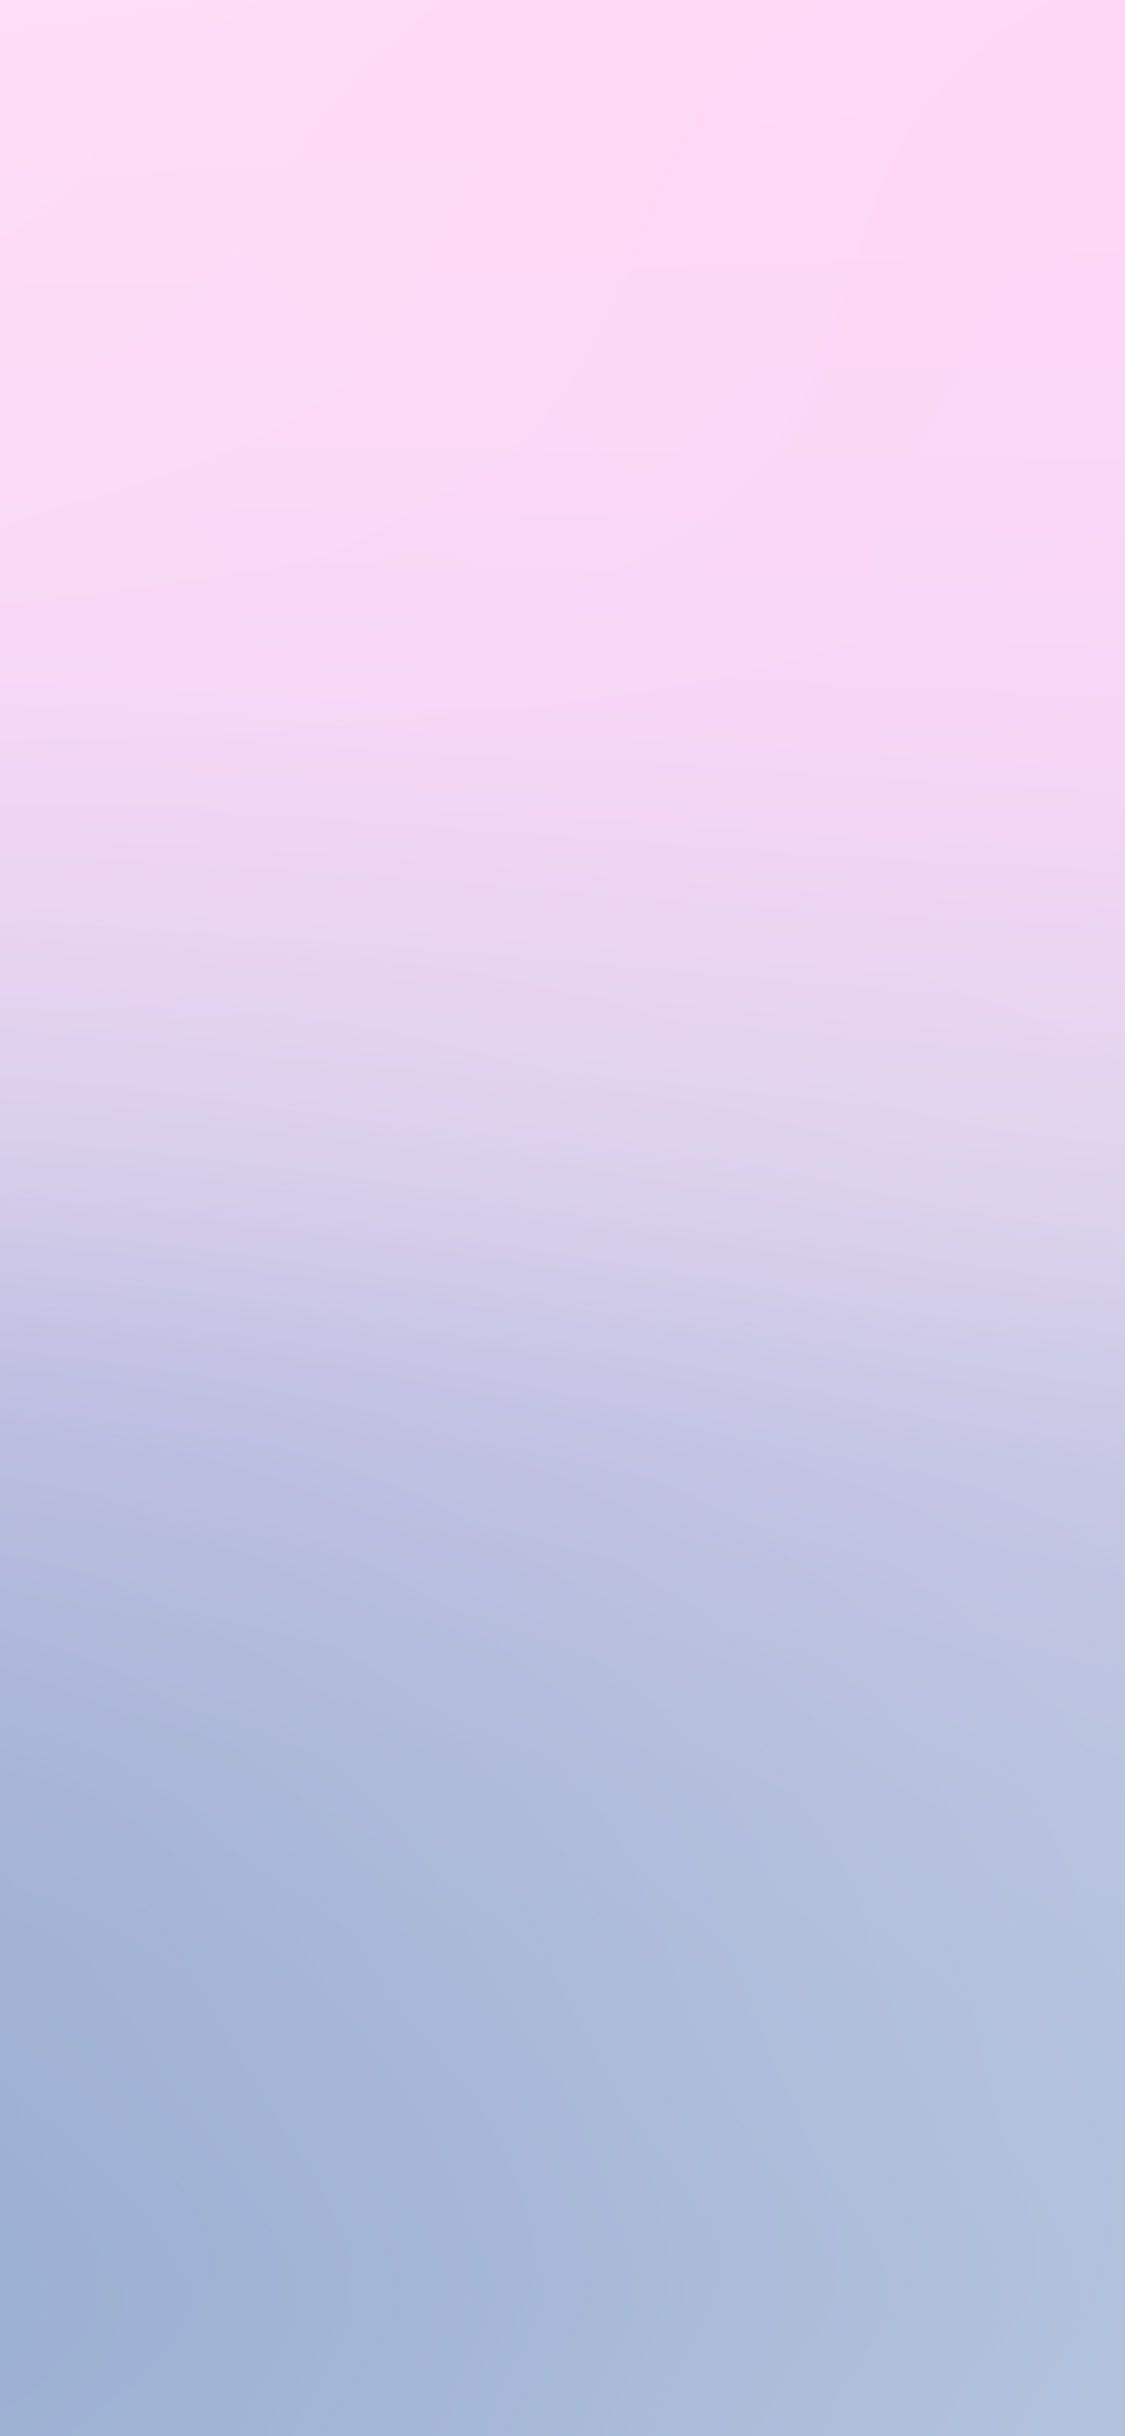 Light Blue and Pink iPhone Wallpaper Free Light Blue and Pink iPhone Background